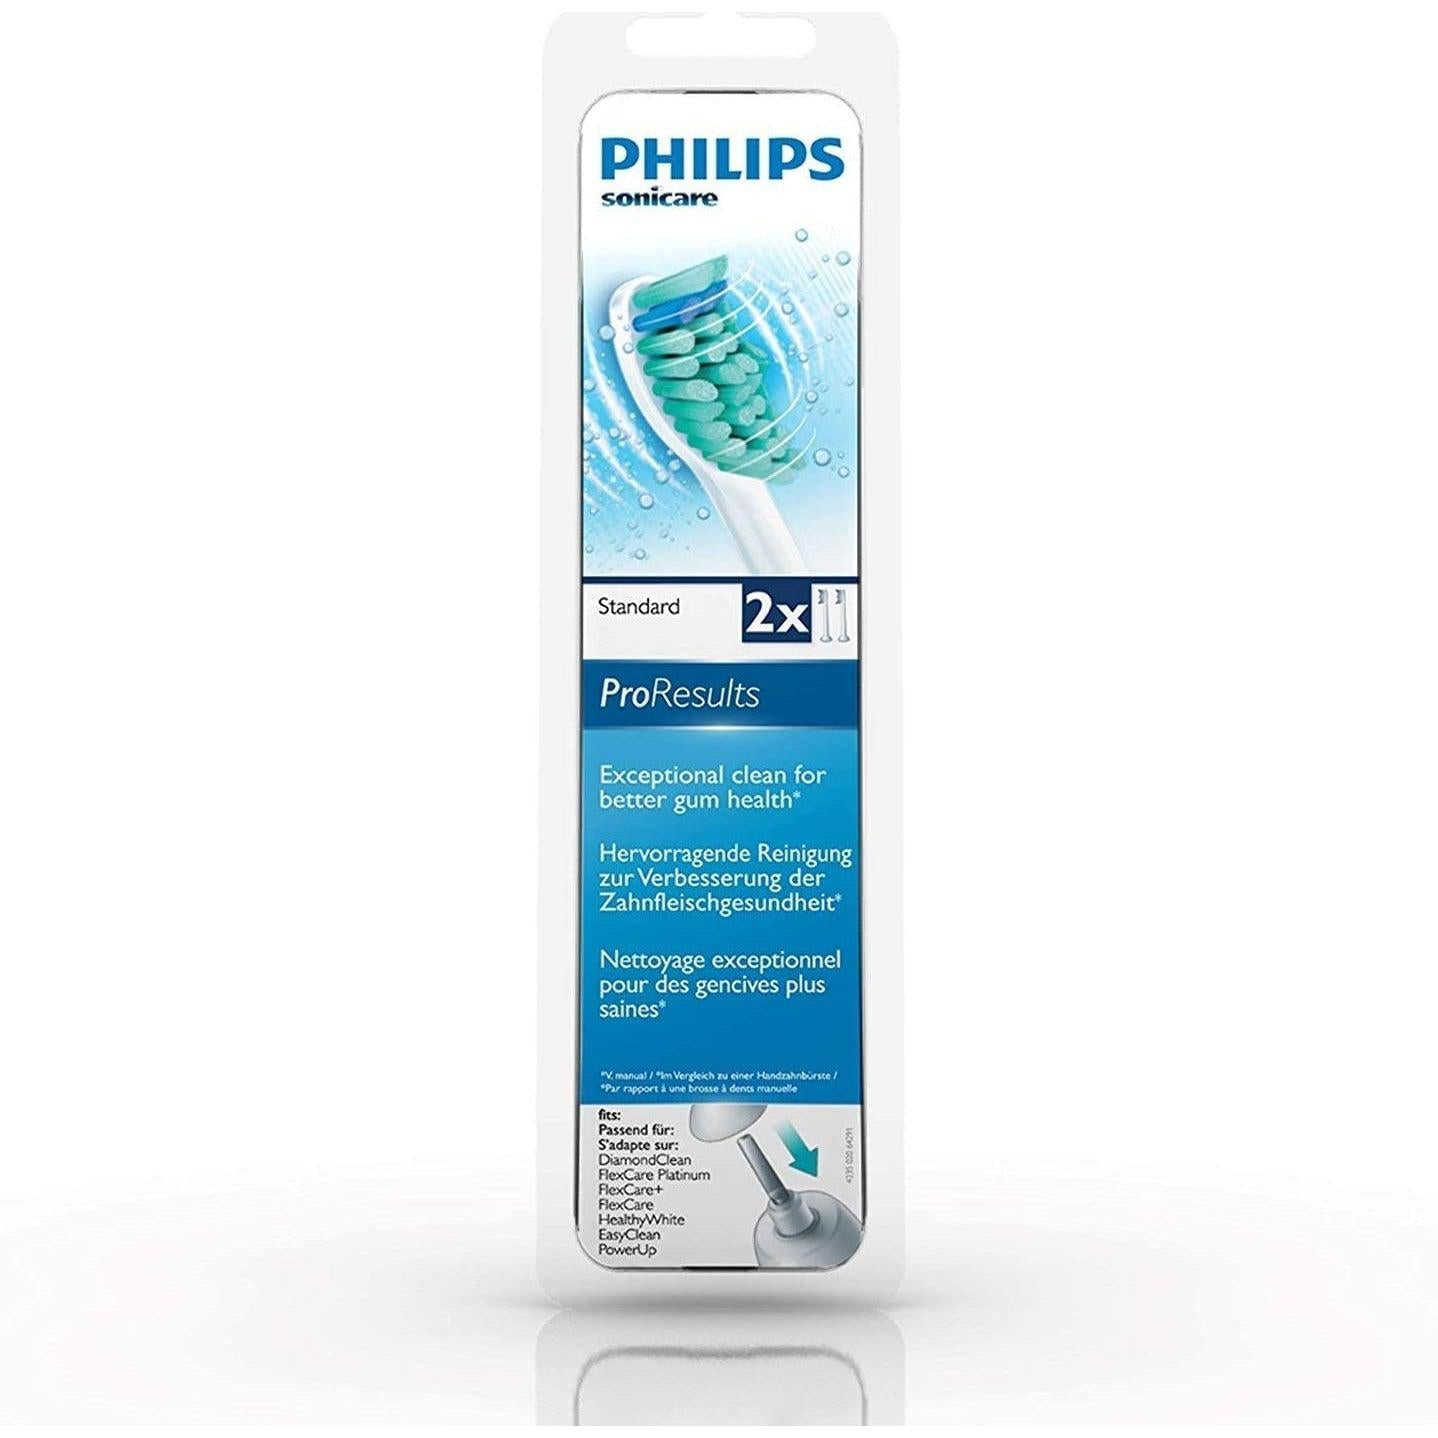 Philips Sonicare ProResults HX6012/07 Original Toothbrush Replacement Brush Heads Standard Pack of 2, White - Healthxpress.ie